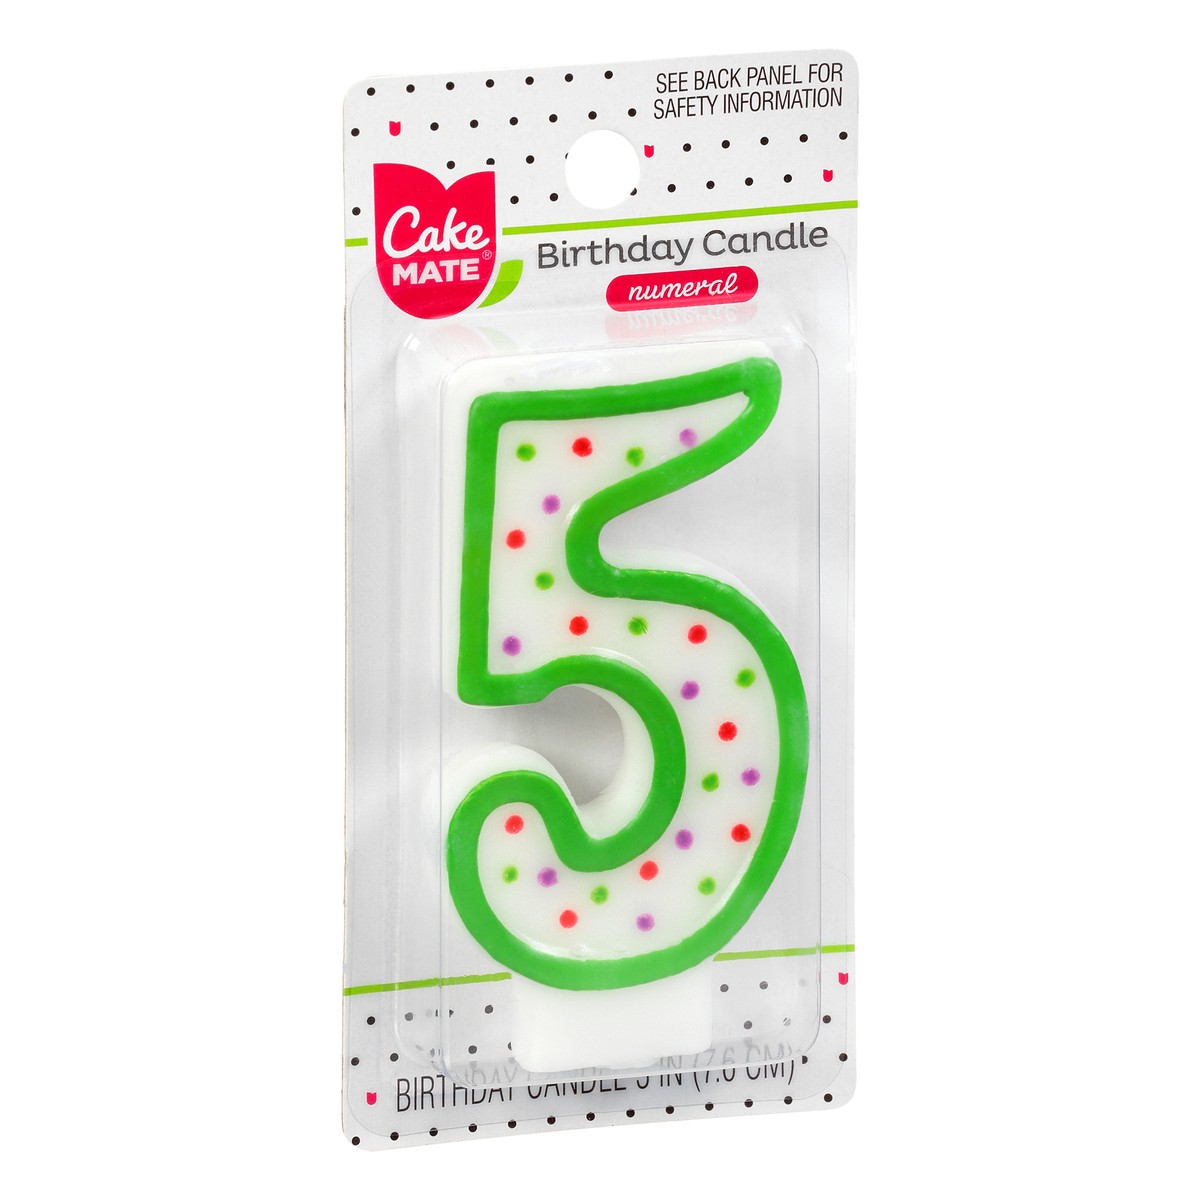 slide 2 of 9, Cake Mate 3 Inch 5 Numeral Birthday Candle 1 ea, 1 ct